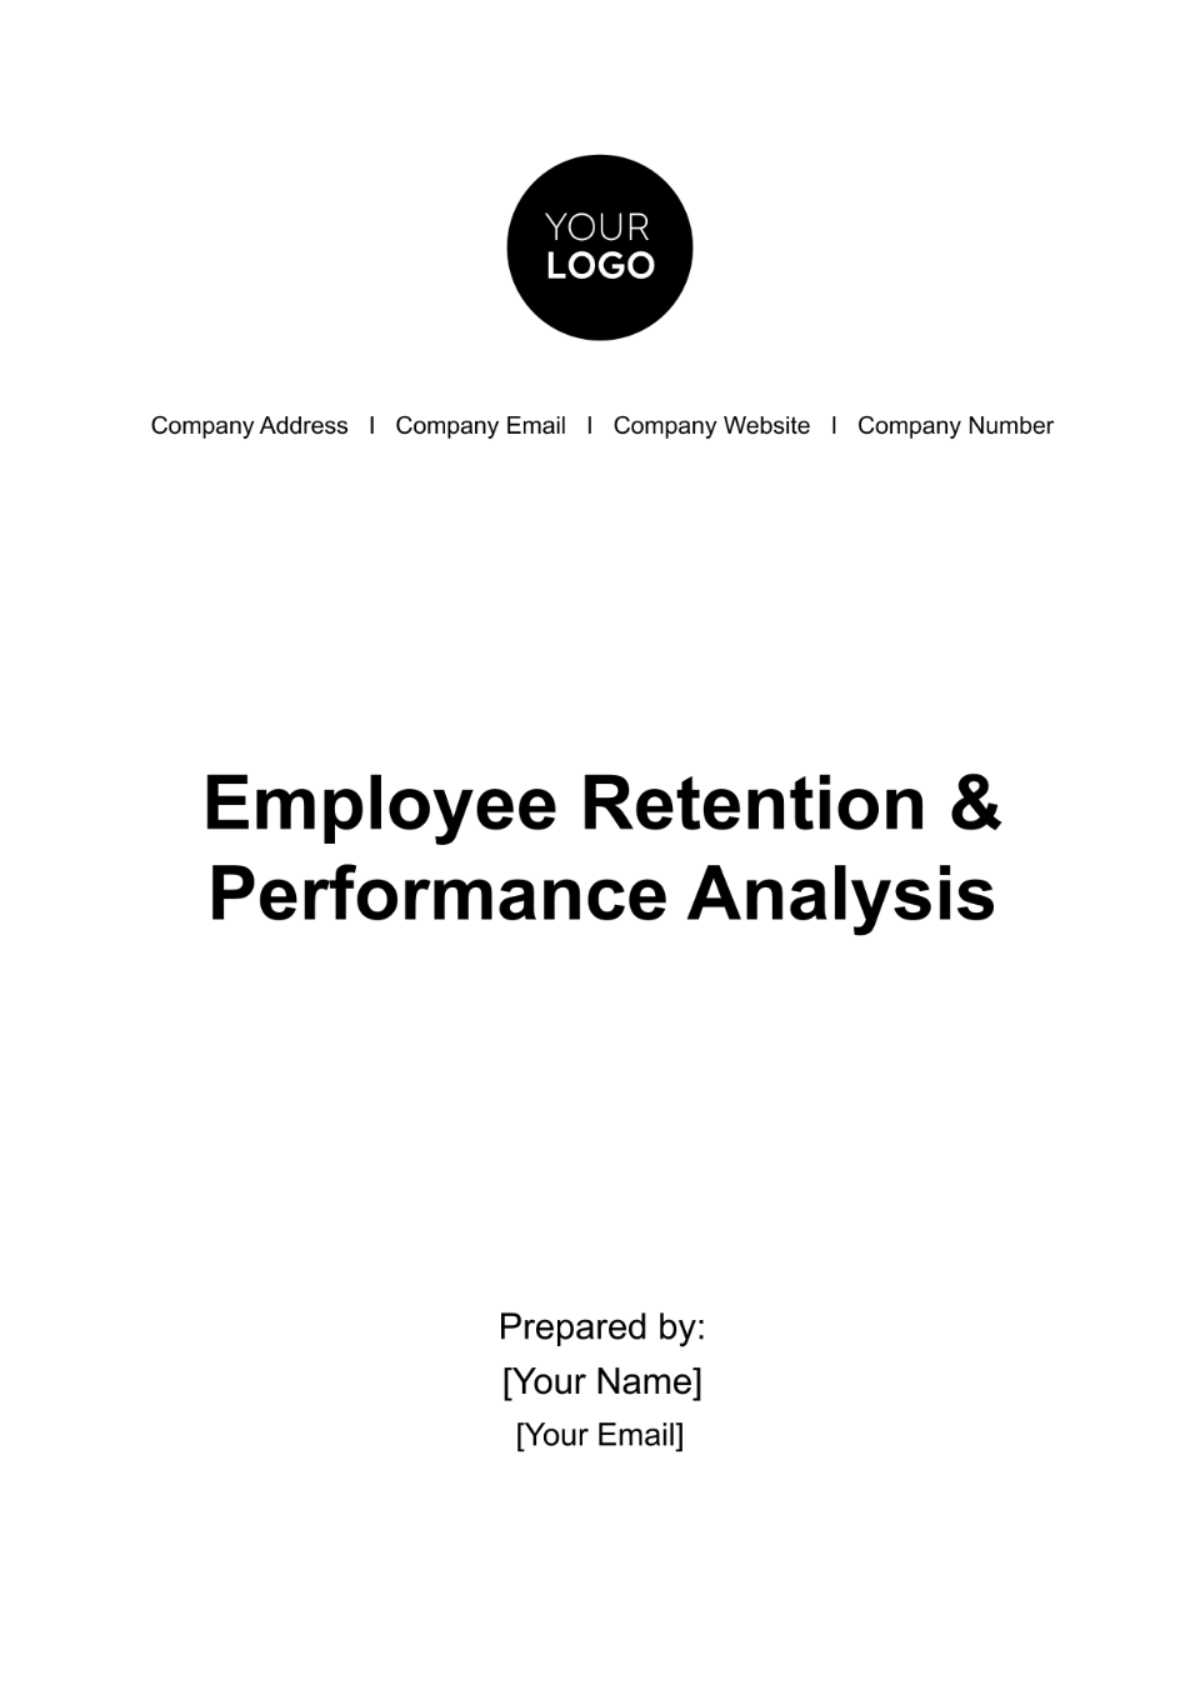 Free Yearly Performance Analysis HR Template